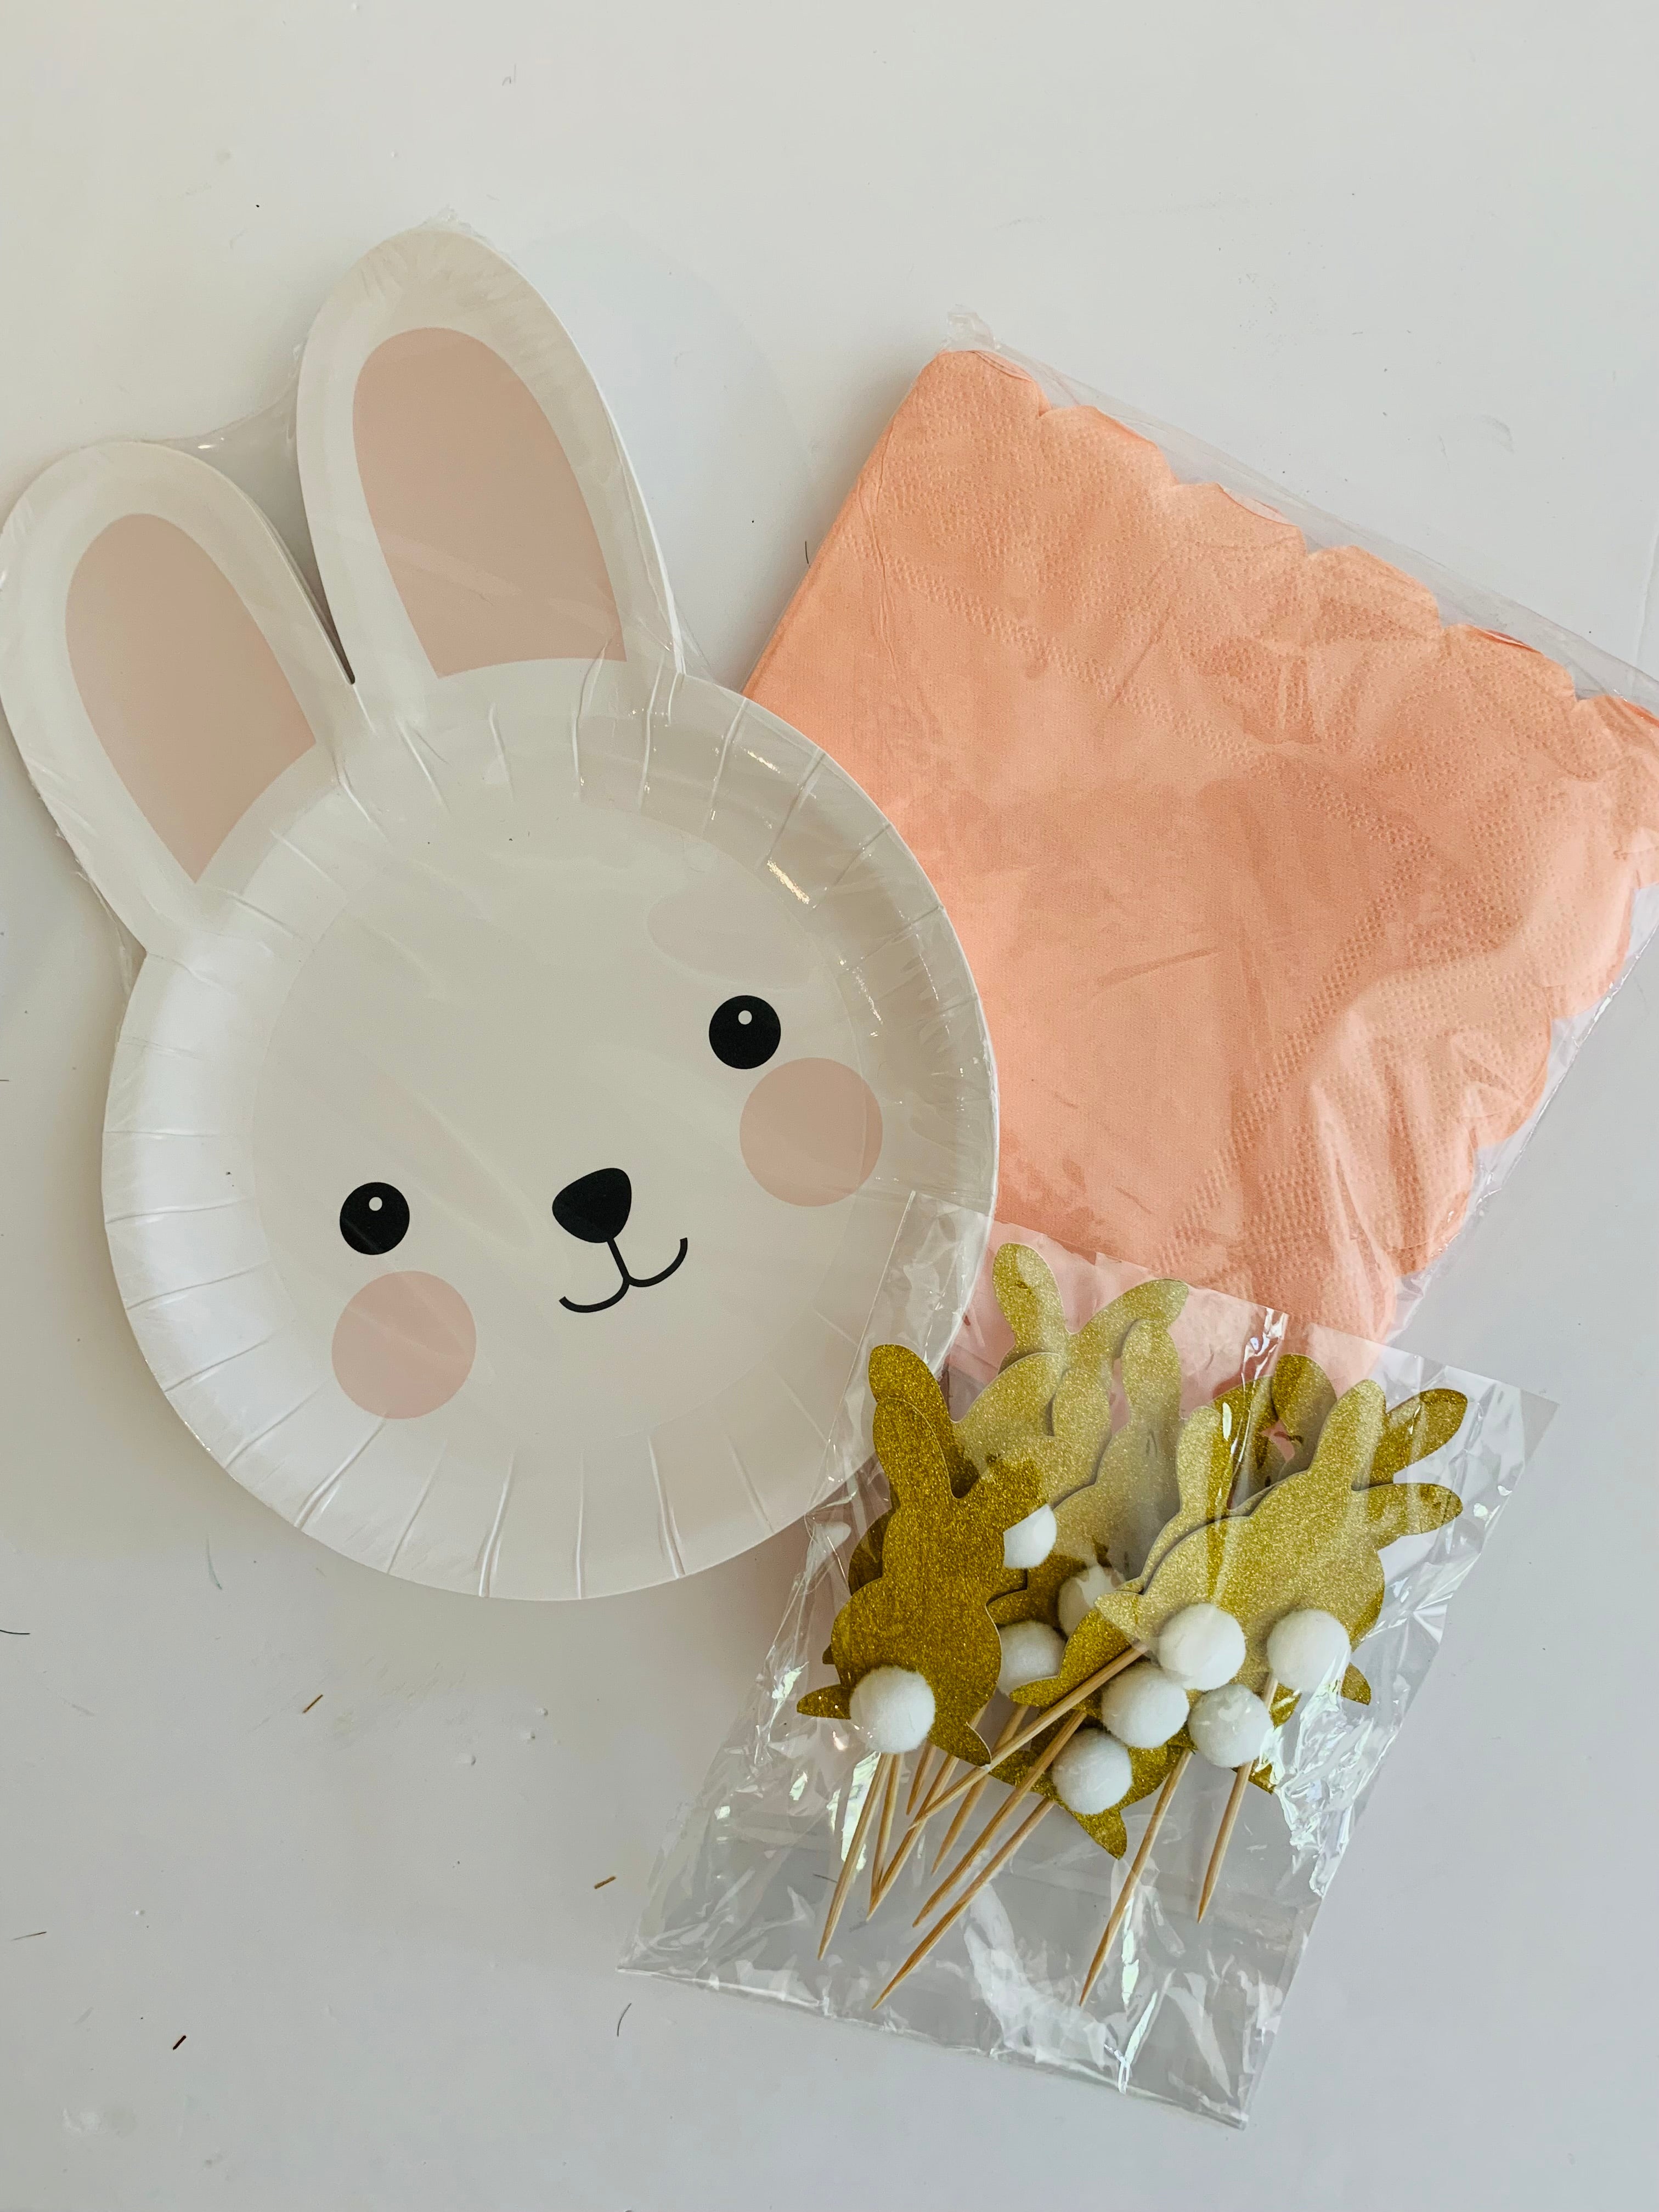 Bunny themed party goodies nz